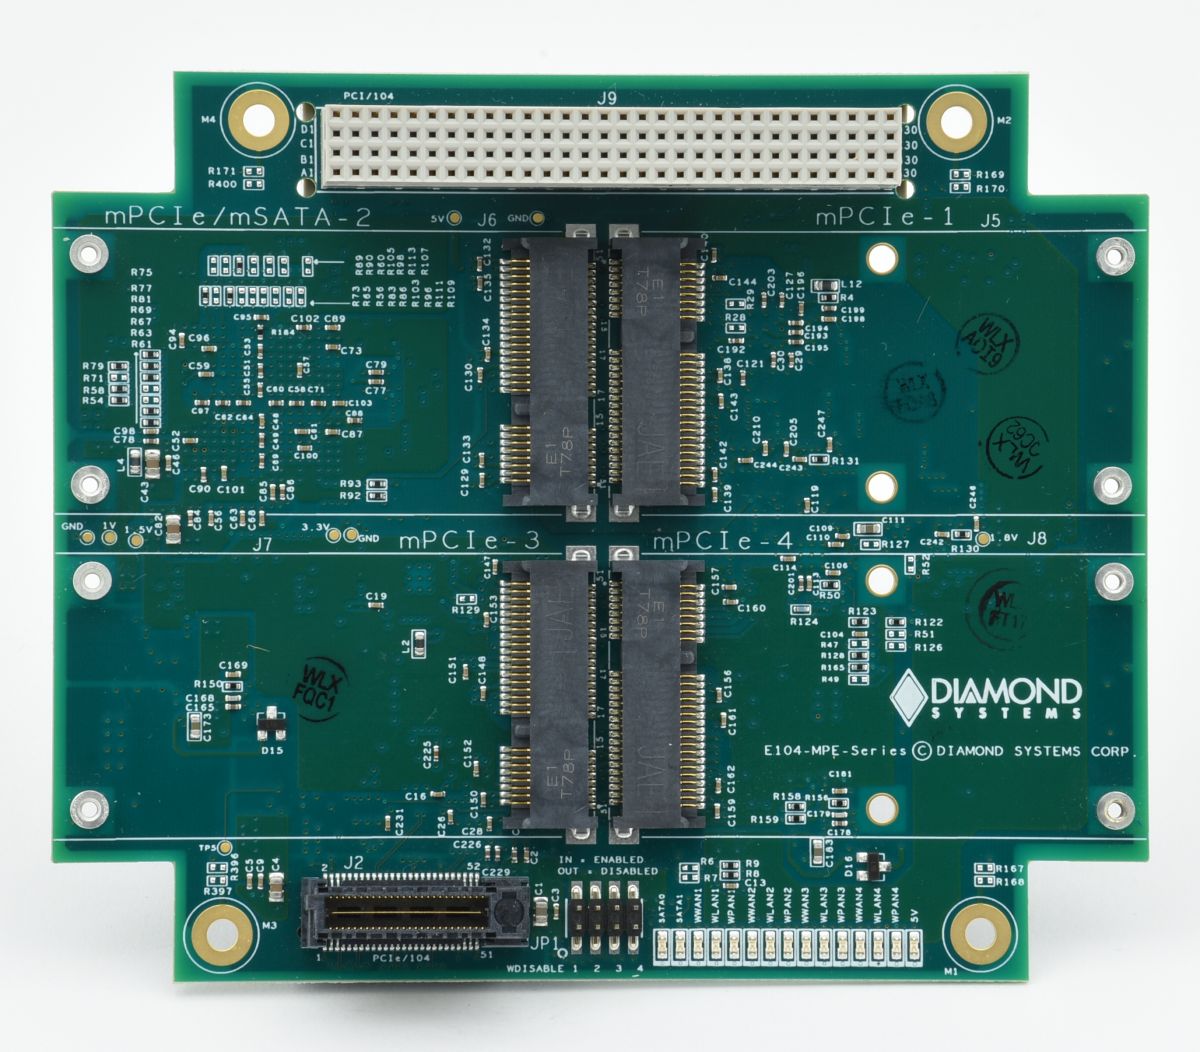 PCIe/104 MiniCard Carrier: Communications Modules, , PCI/104-Express